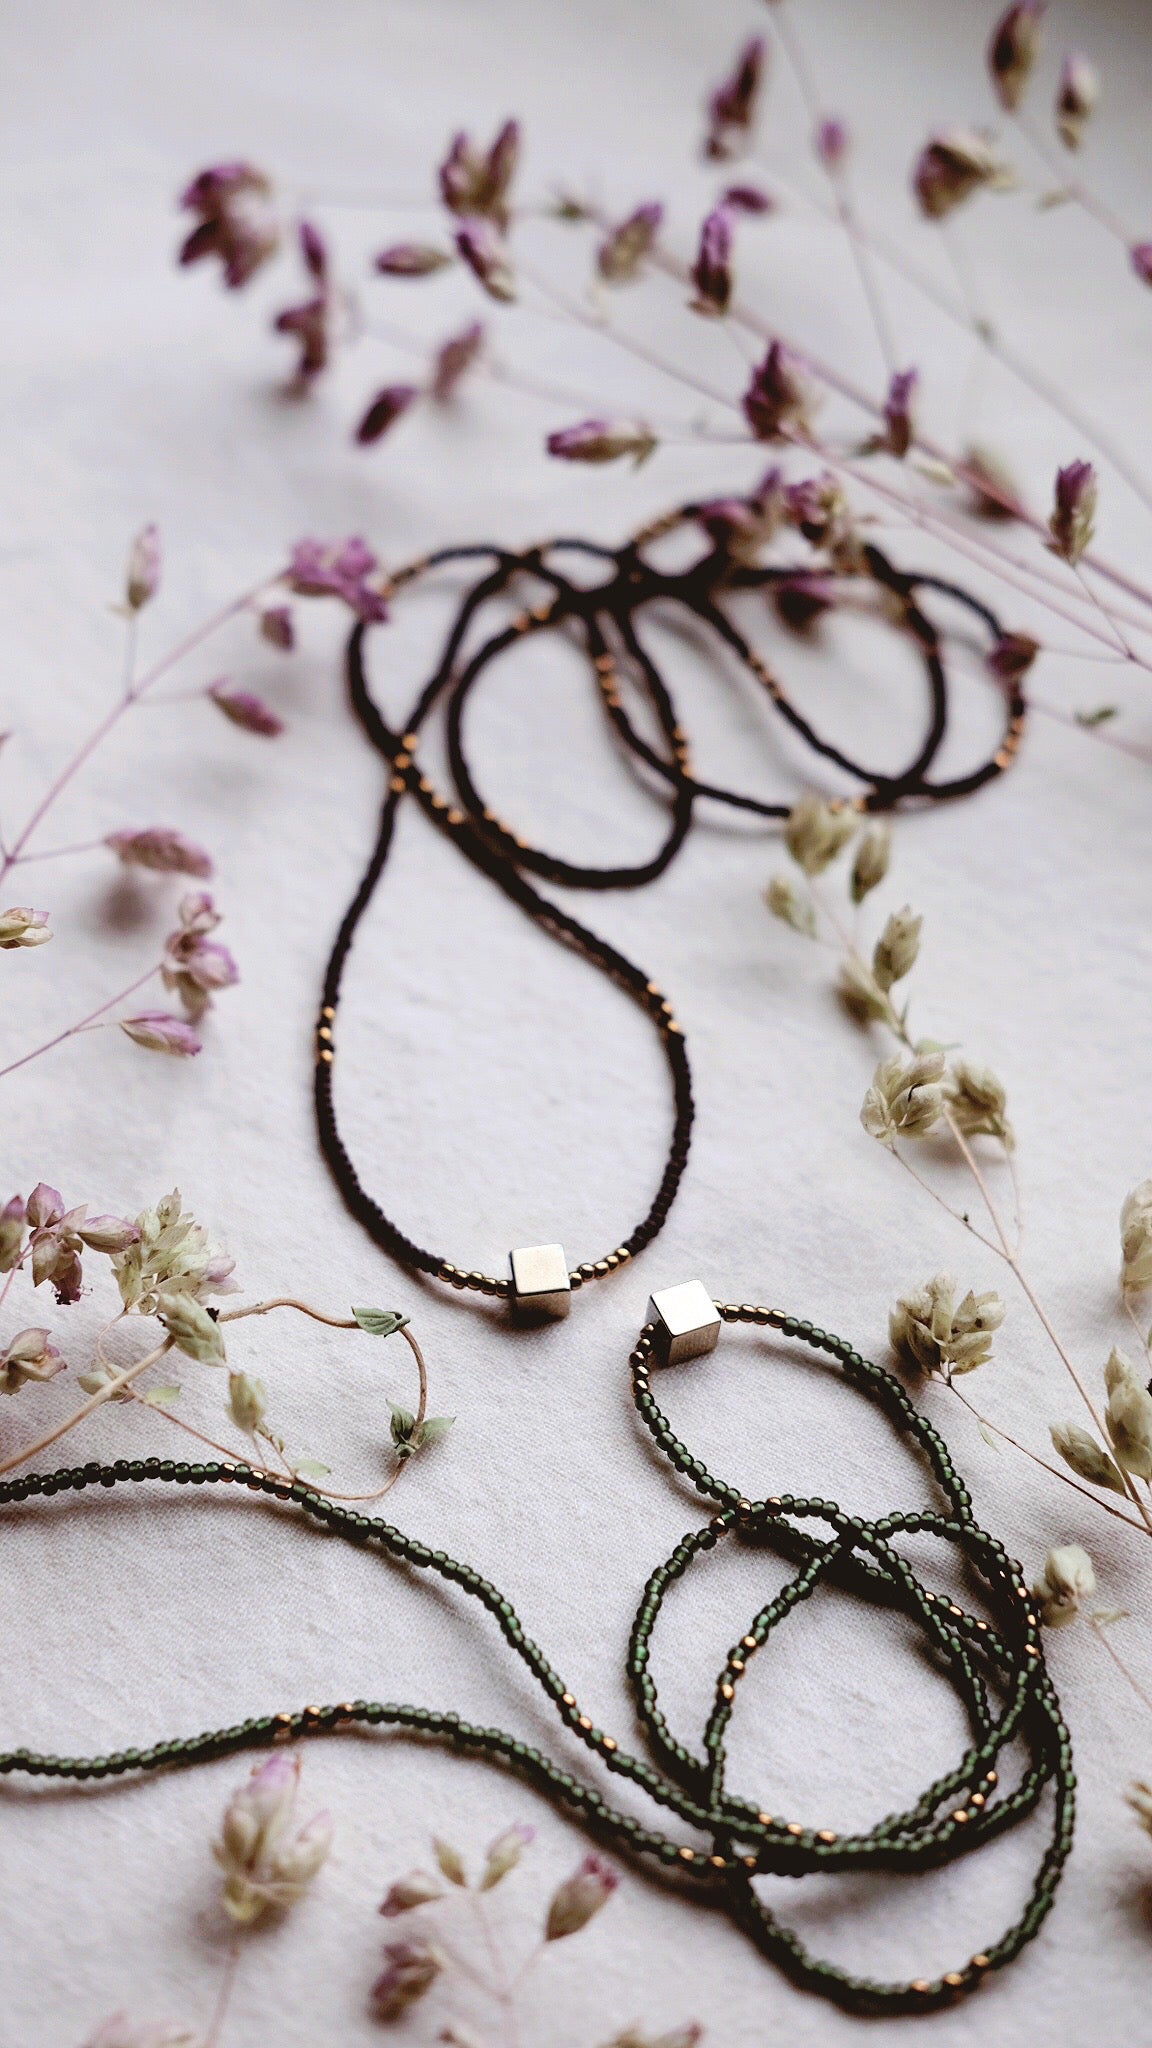 Lunar Festival  + Minimalist Pyrite and Vintage glass beaded necklaces